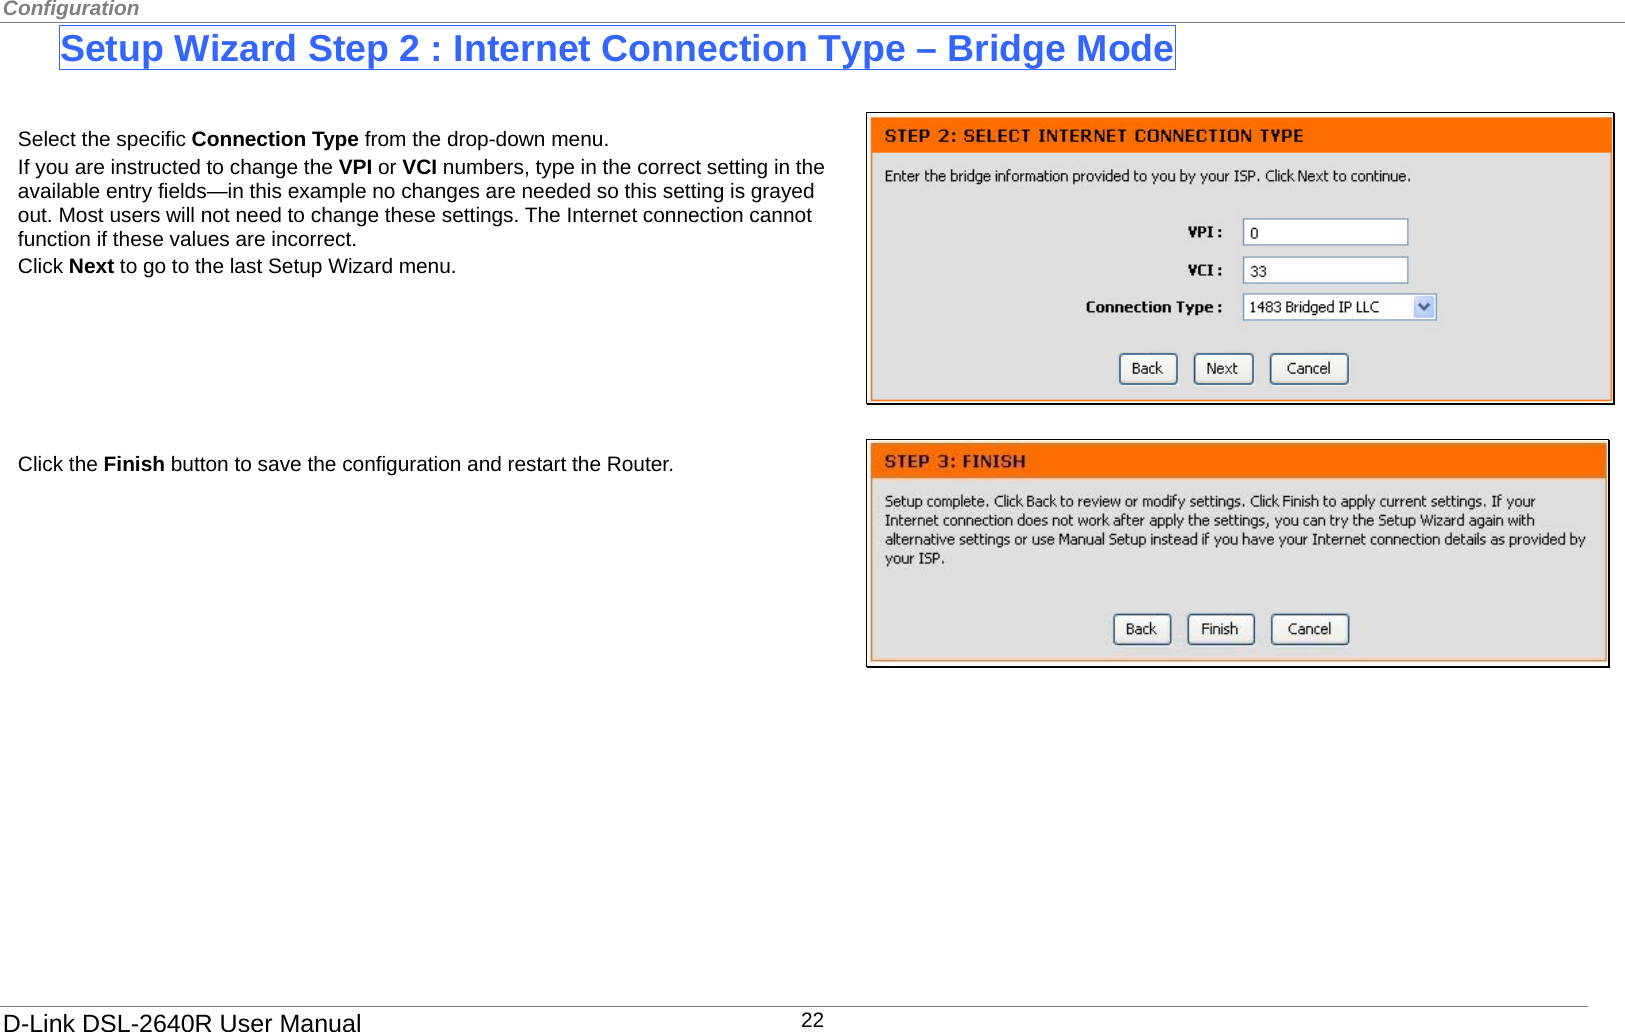 Configuration  Setup Wizard Step 2 : Internet Connection Type – Bridge Mode   Select the specific Connection Type from the drop-down menu. If you are instructed to change the VPI or VCI numbers, type in the correct setting in the available entry fields—in this example no changes are needed so this setting is grayed out. Most users will not need to change these settings. The Internet connection cannot function if these values are incorrect. Click Next to go to the last Setup Wizard menu.       Click the Finish button to save the configuration and restart the Router.              D-Link DSL-2640R User Manual 22